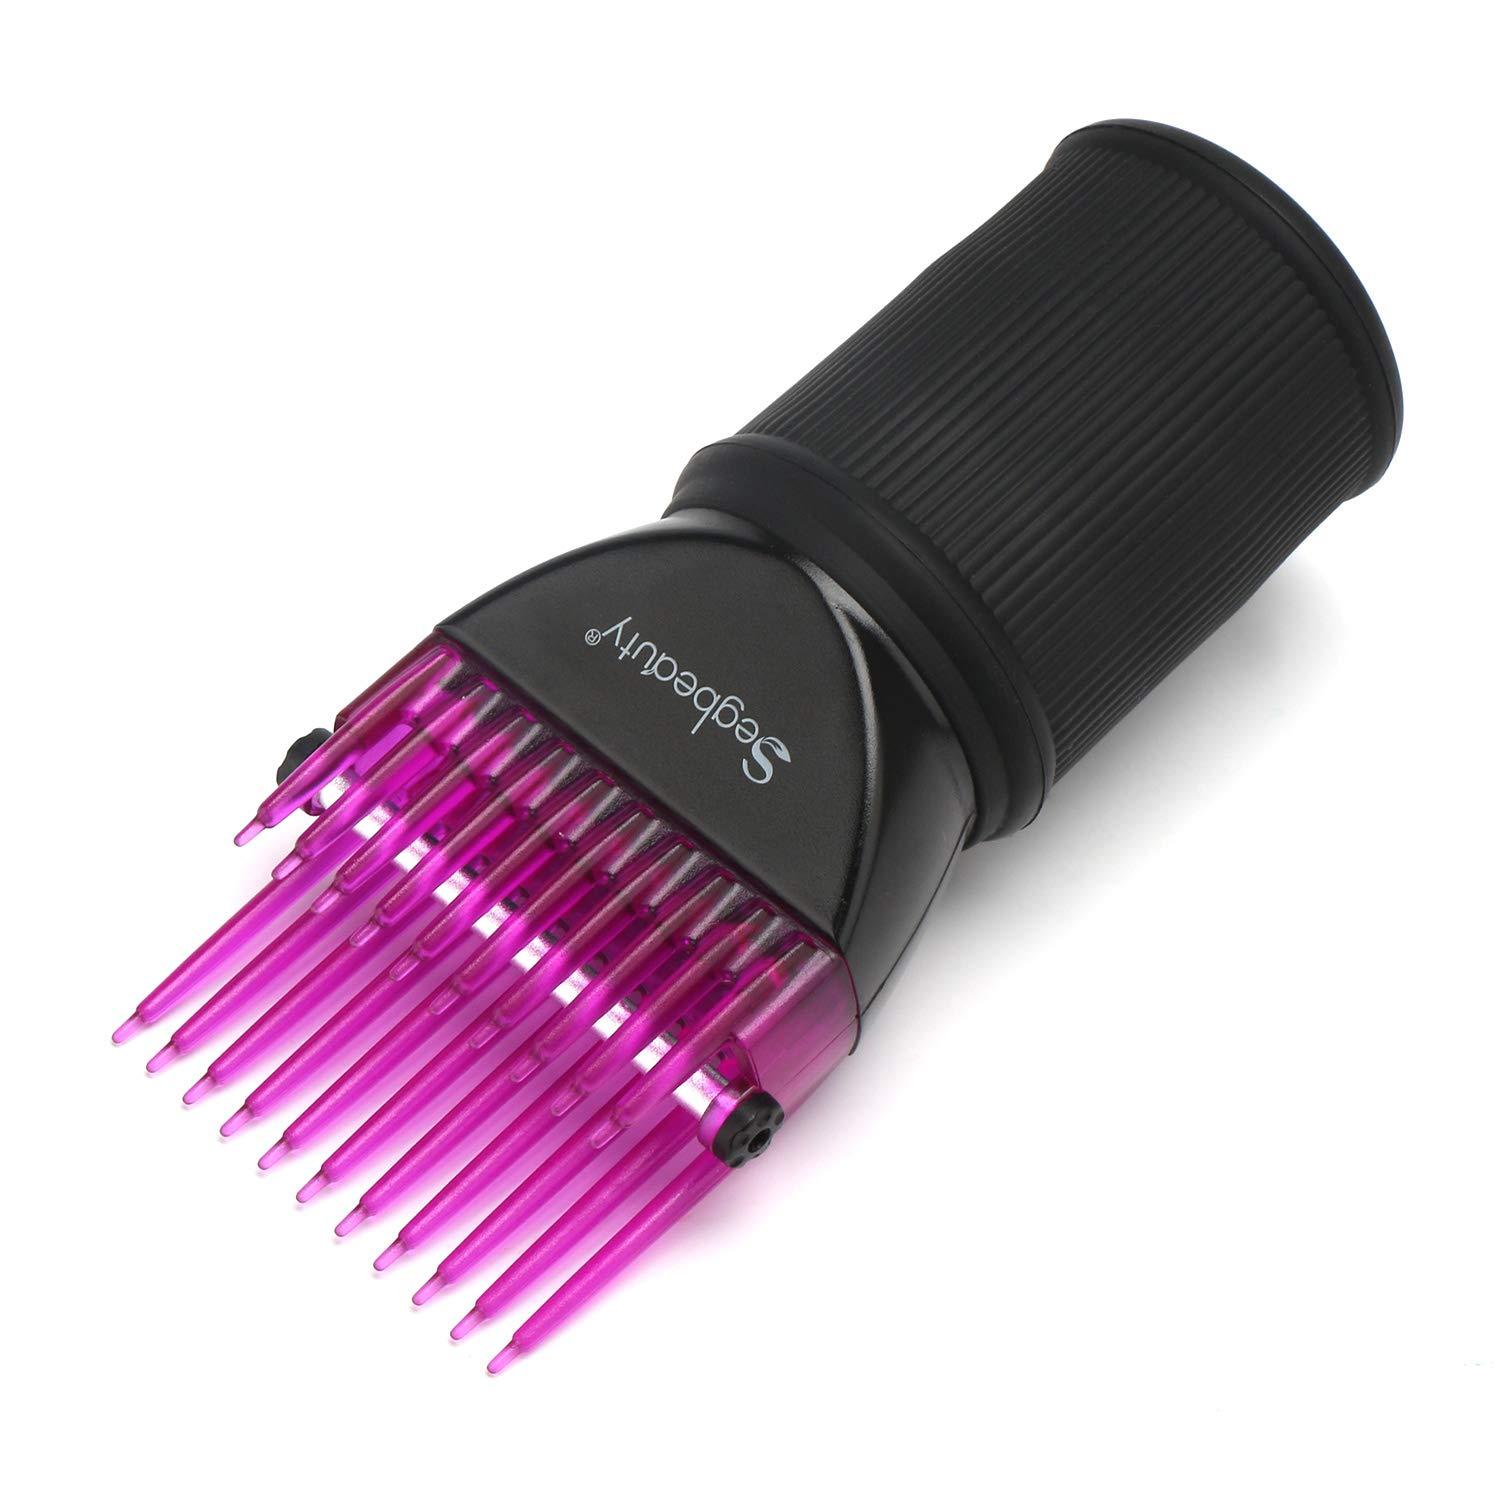 Blow Dryer Comb Attachment, Segbeauty Hair Dryer Blower Concentrator Nozzle   Brush Attachments, Hairdressing Styling Salon Tool Pic for  Fine, Wavy, Curly, Natural Hair Purple